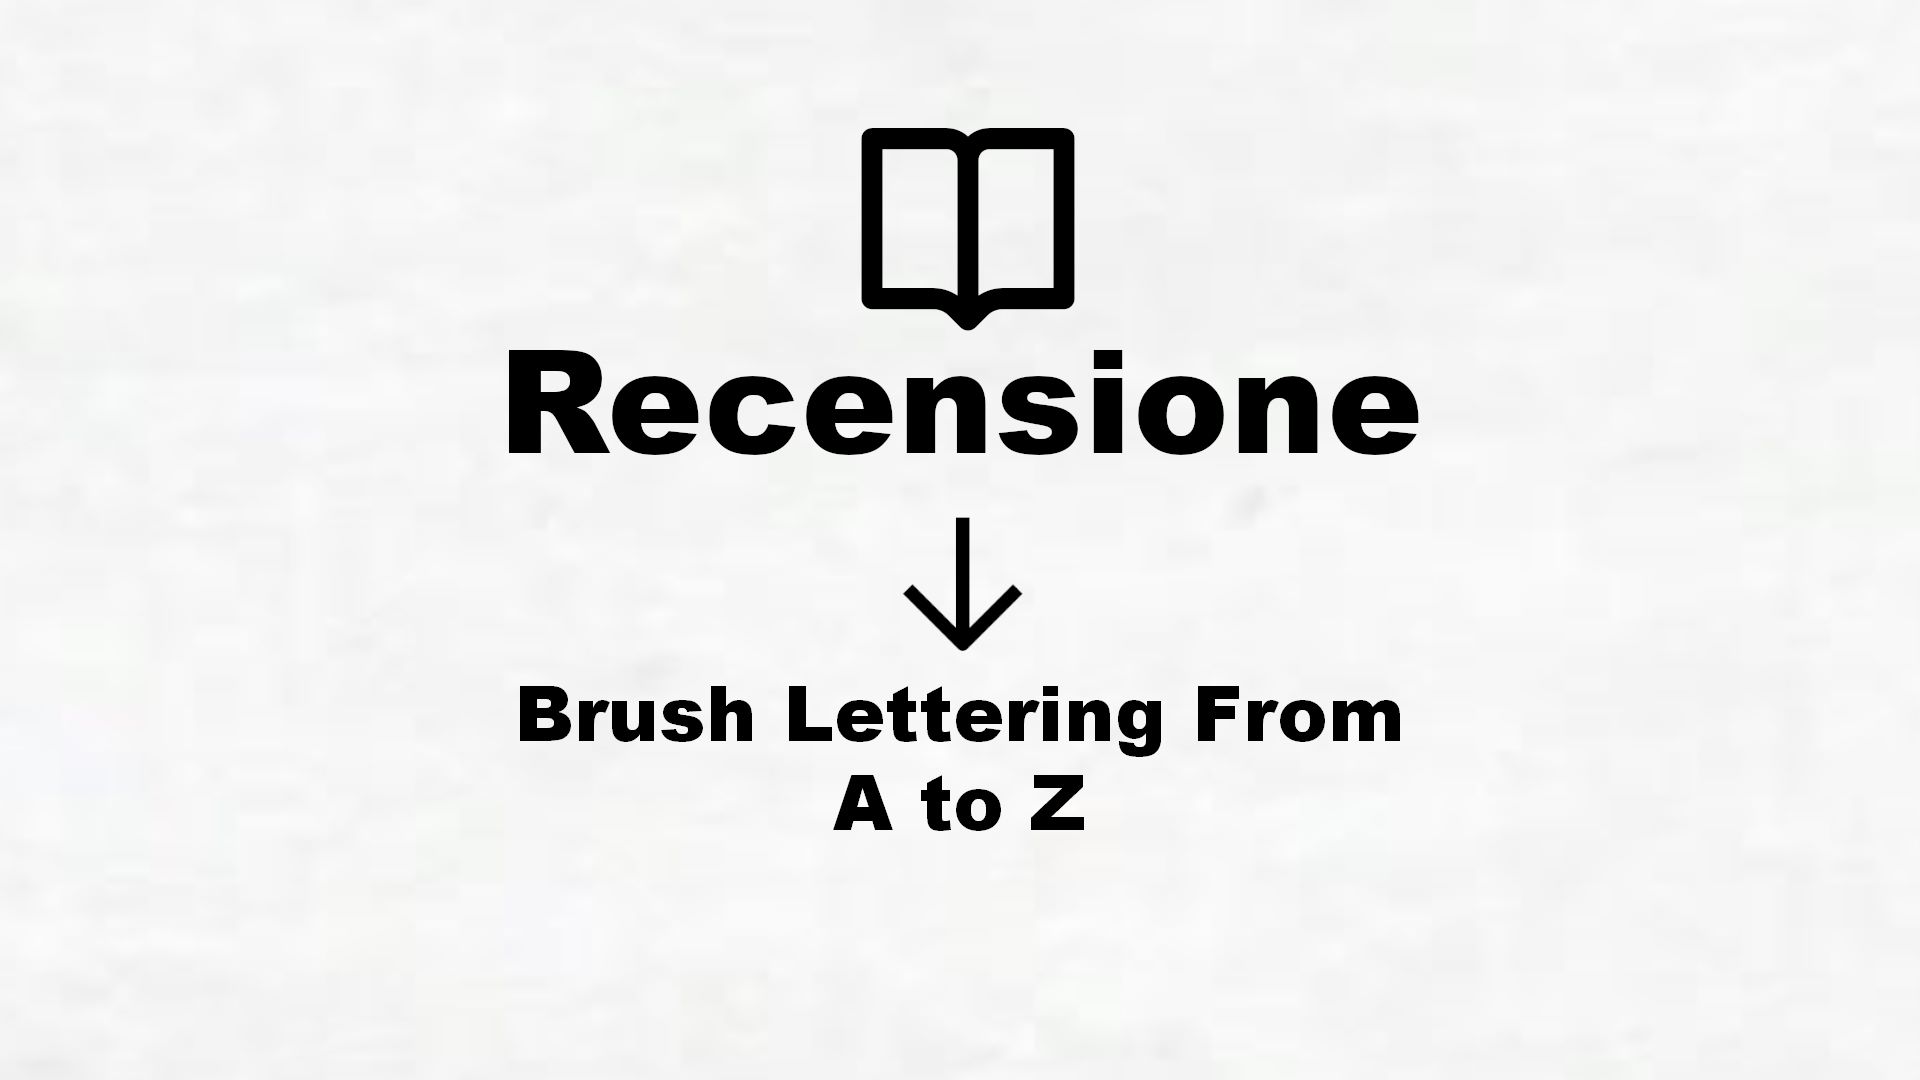 Brush Lettering From A to Z – Recensione Libro